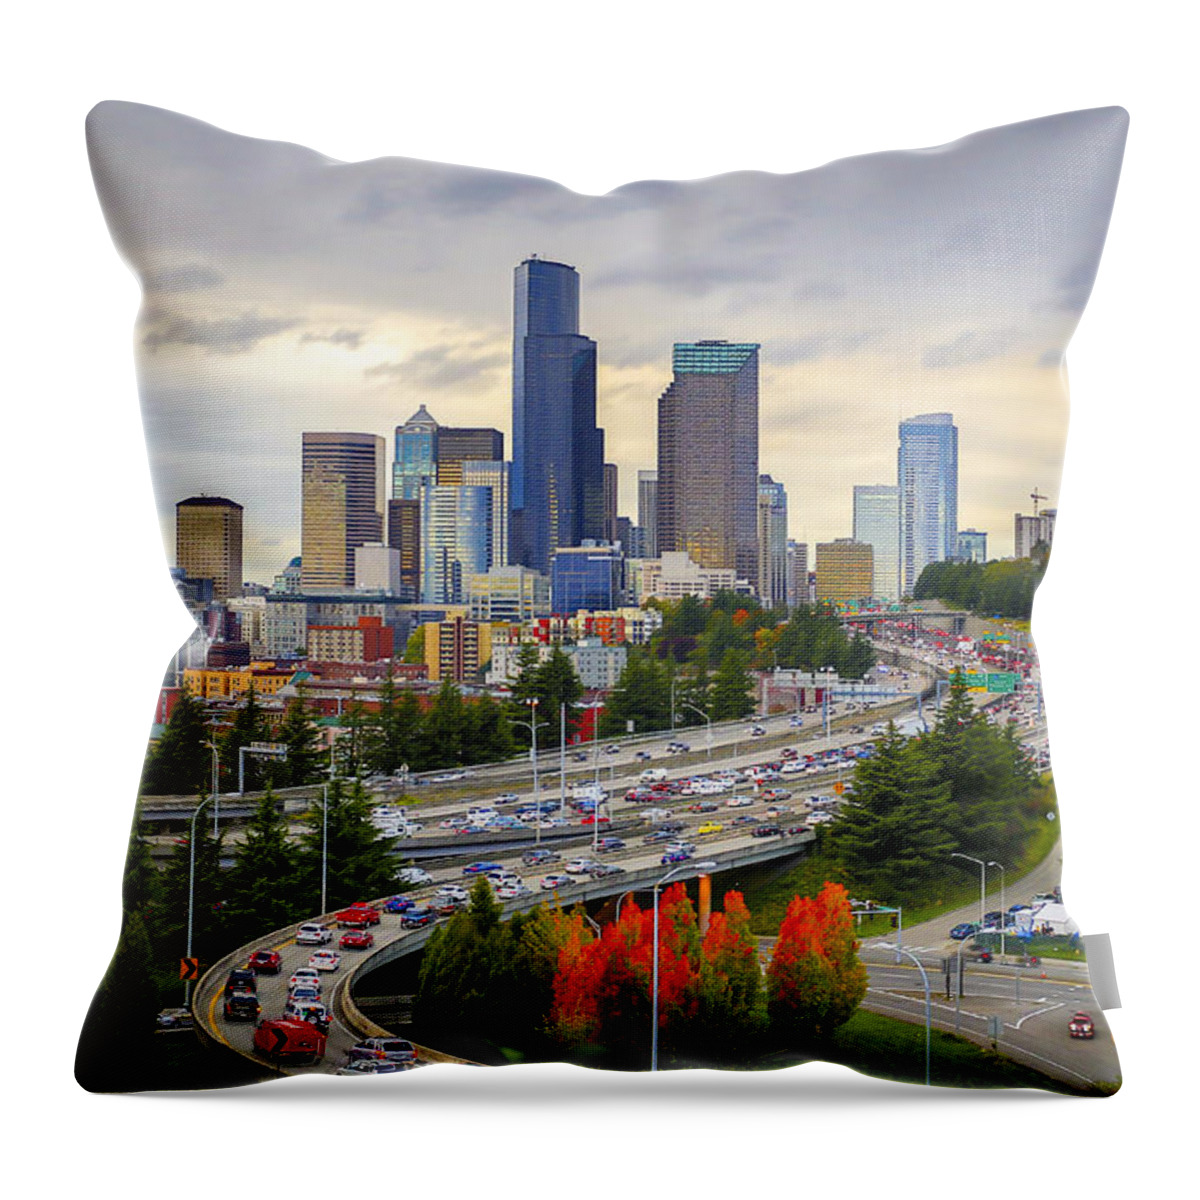 Seattle Throw Pillow featuring the photograph Seattle Skyline by The Flying Photographer